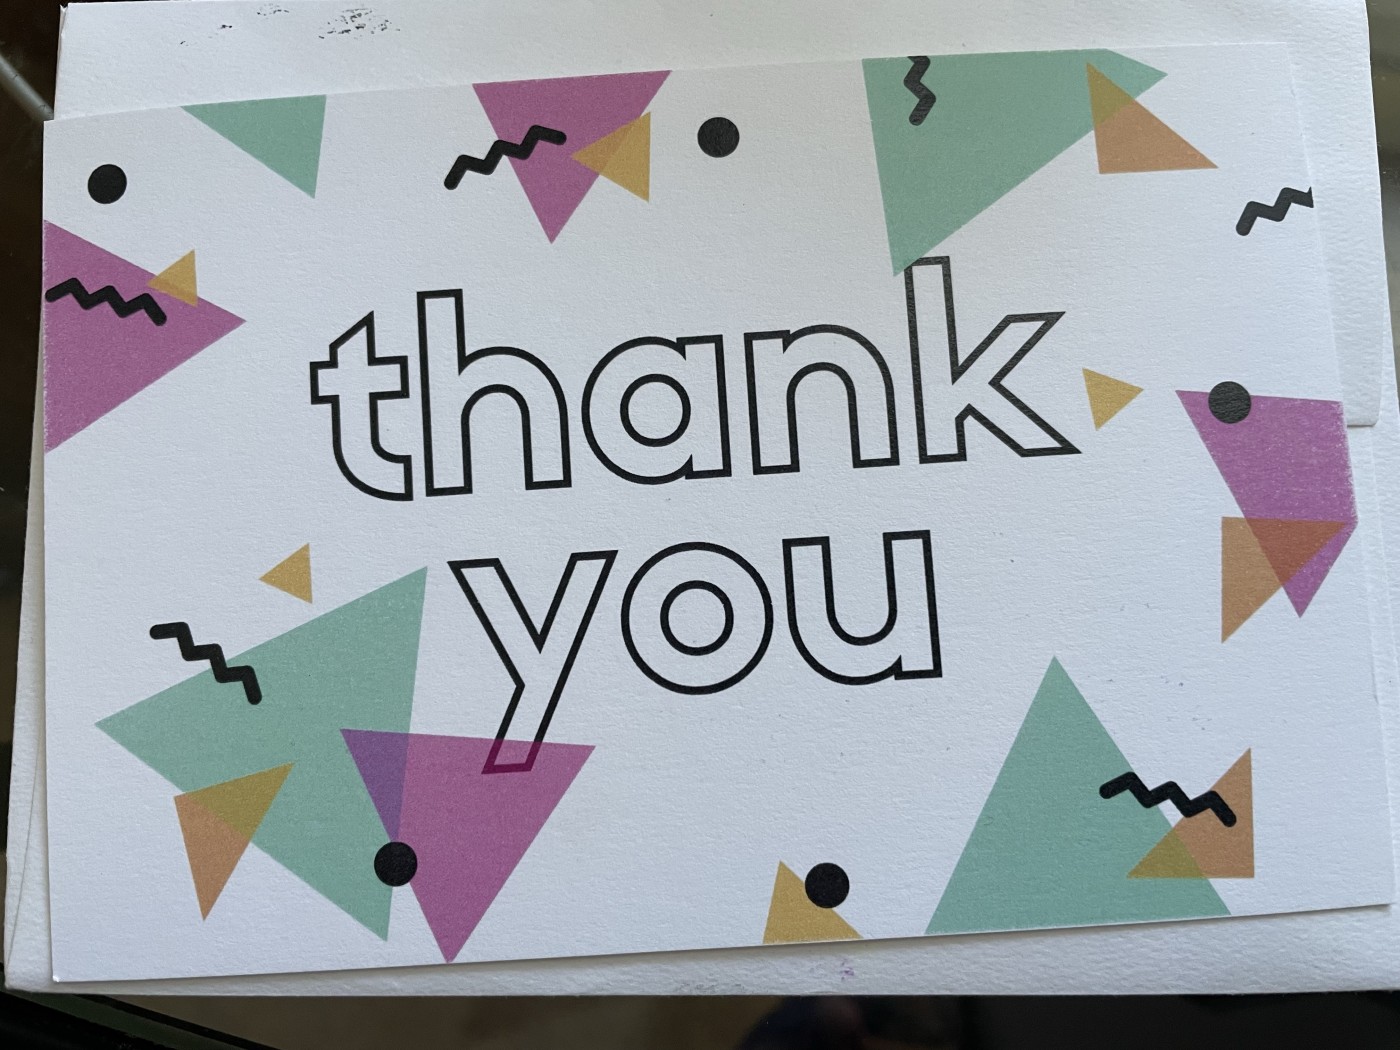 Front of a card from Handwrite with "thank you" printed in hollow block letters. The words are surrounded by pink, aqua, and orange triangles with black squiggles and dots.